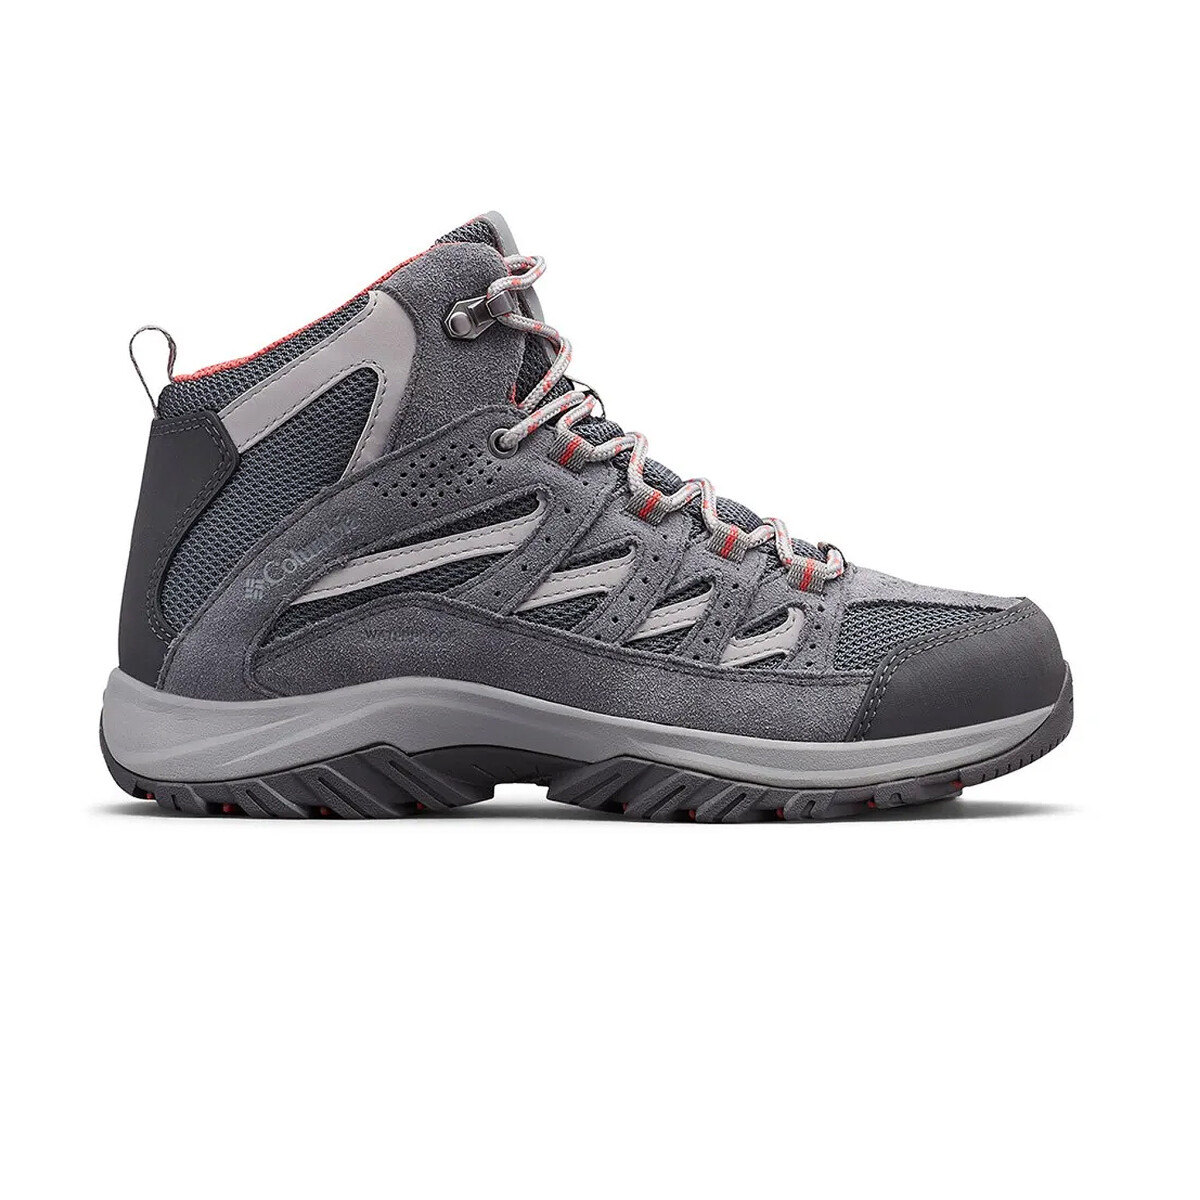 COLUMBIA CRESTWOOD MID WATER - Gray 